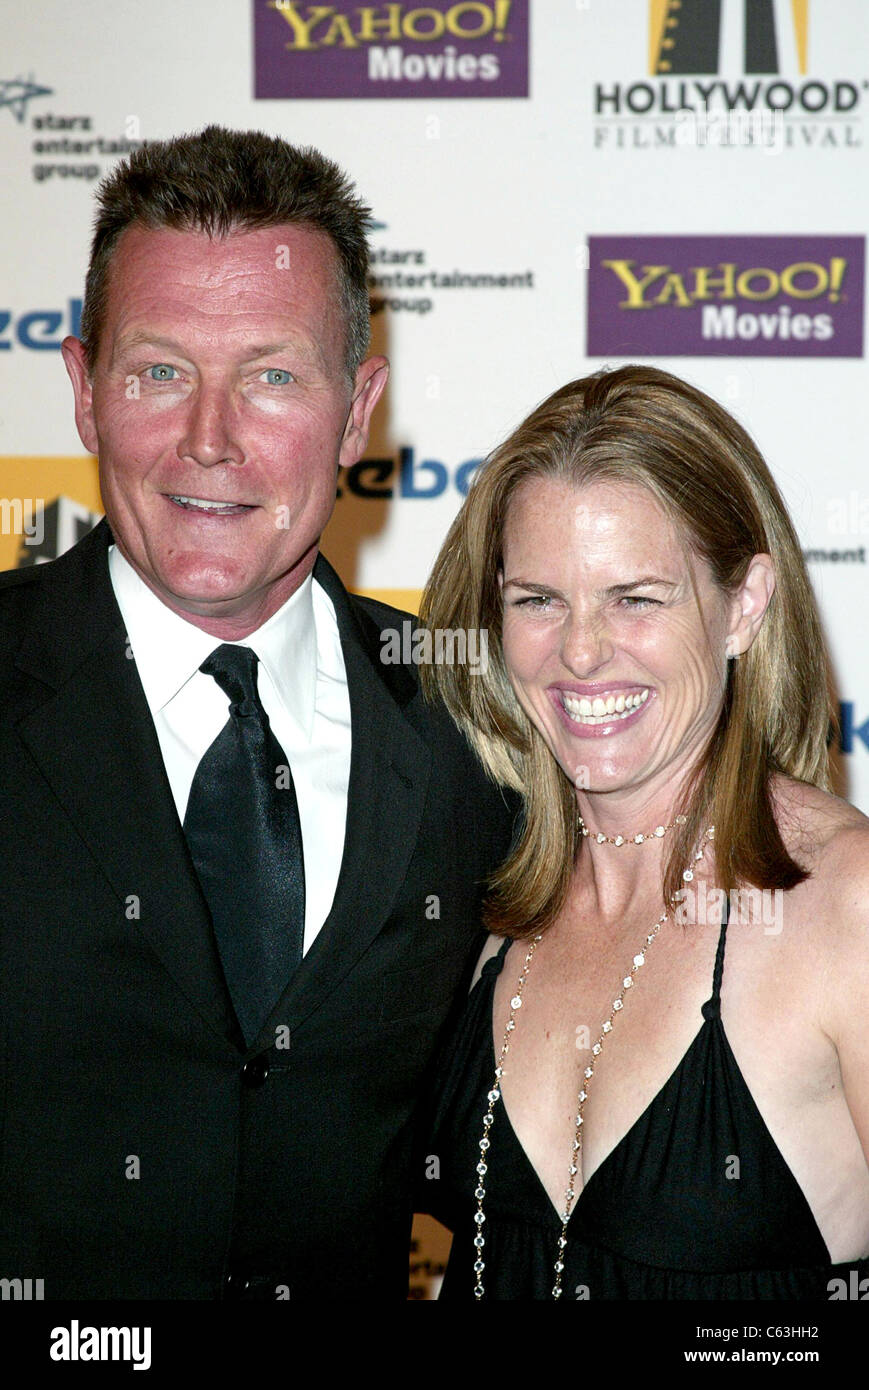 Robert Patrick at arrivals for 9th ANNUAL HOLLYWOOD FILM FESTIVAL HOLLYWOOD AWARDS, Beverly Hilton Hotel, Los Angeles, CA, October 24, 2005. Photo by: Jeremy Montemagni/Everett Collection Stock Photo